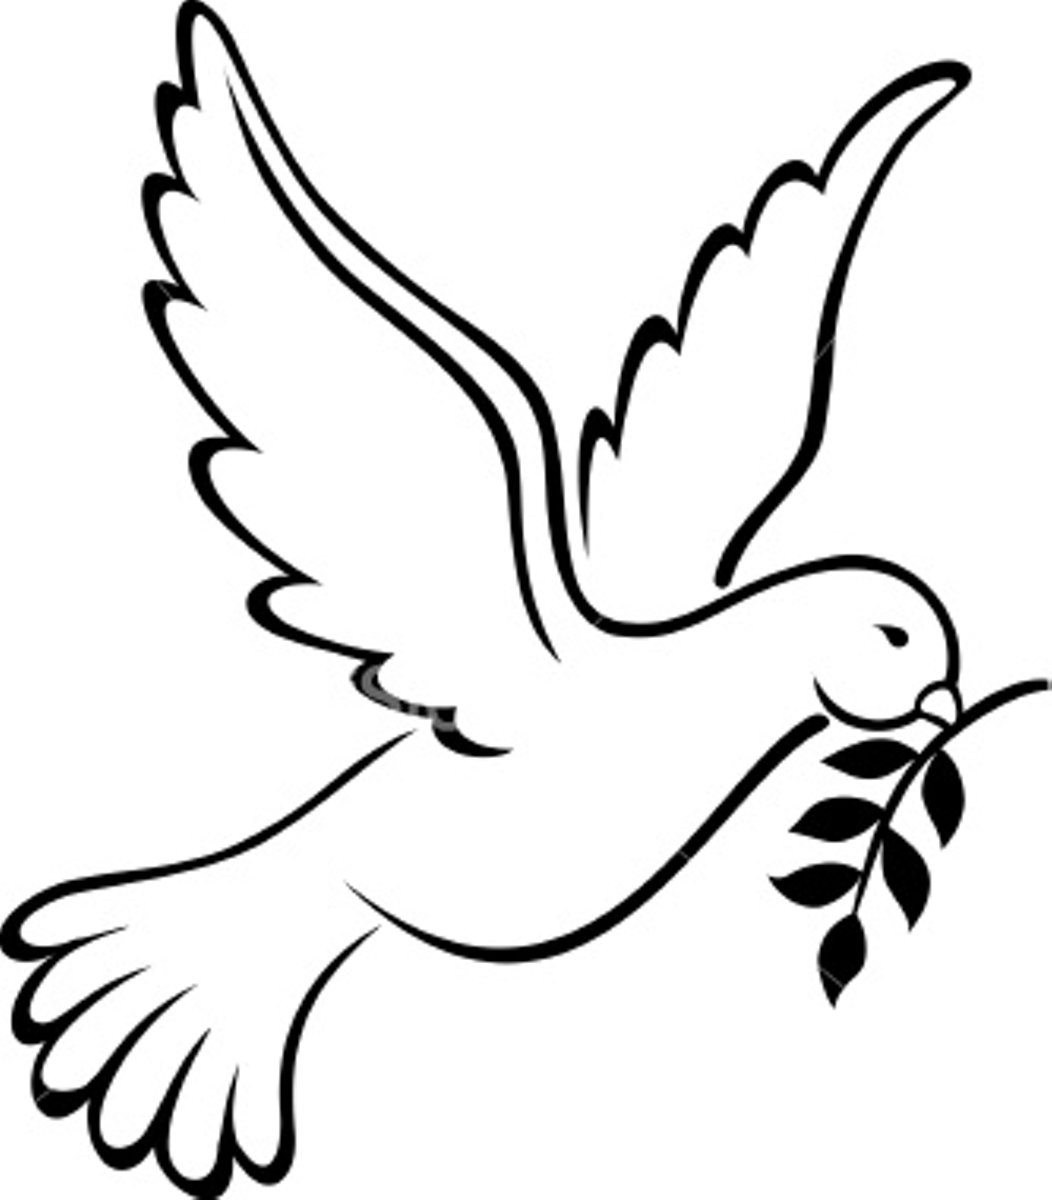 ist2_4364427-dove-symbol-of-peace-on-earth.jpg - zeriaph ...